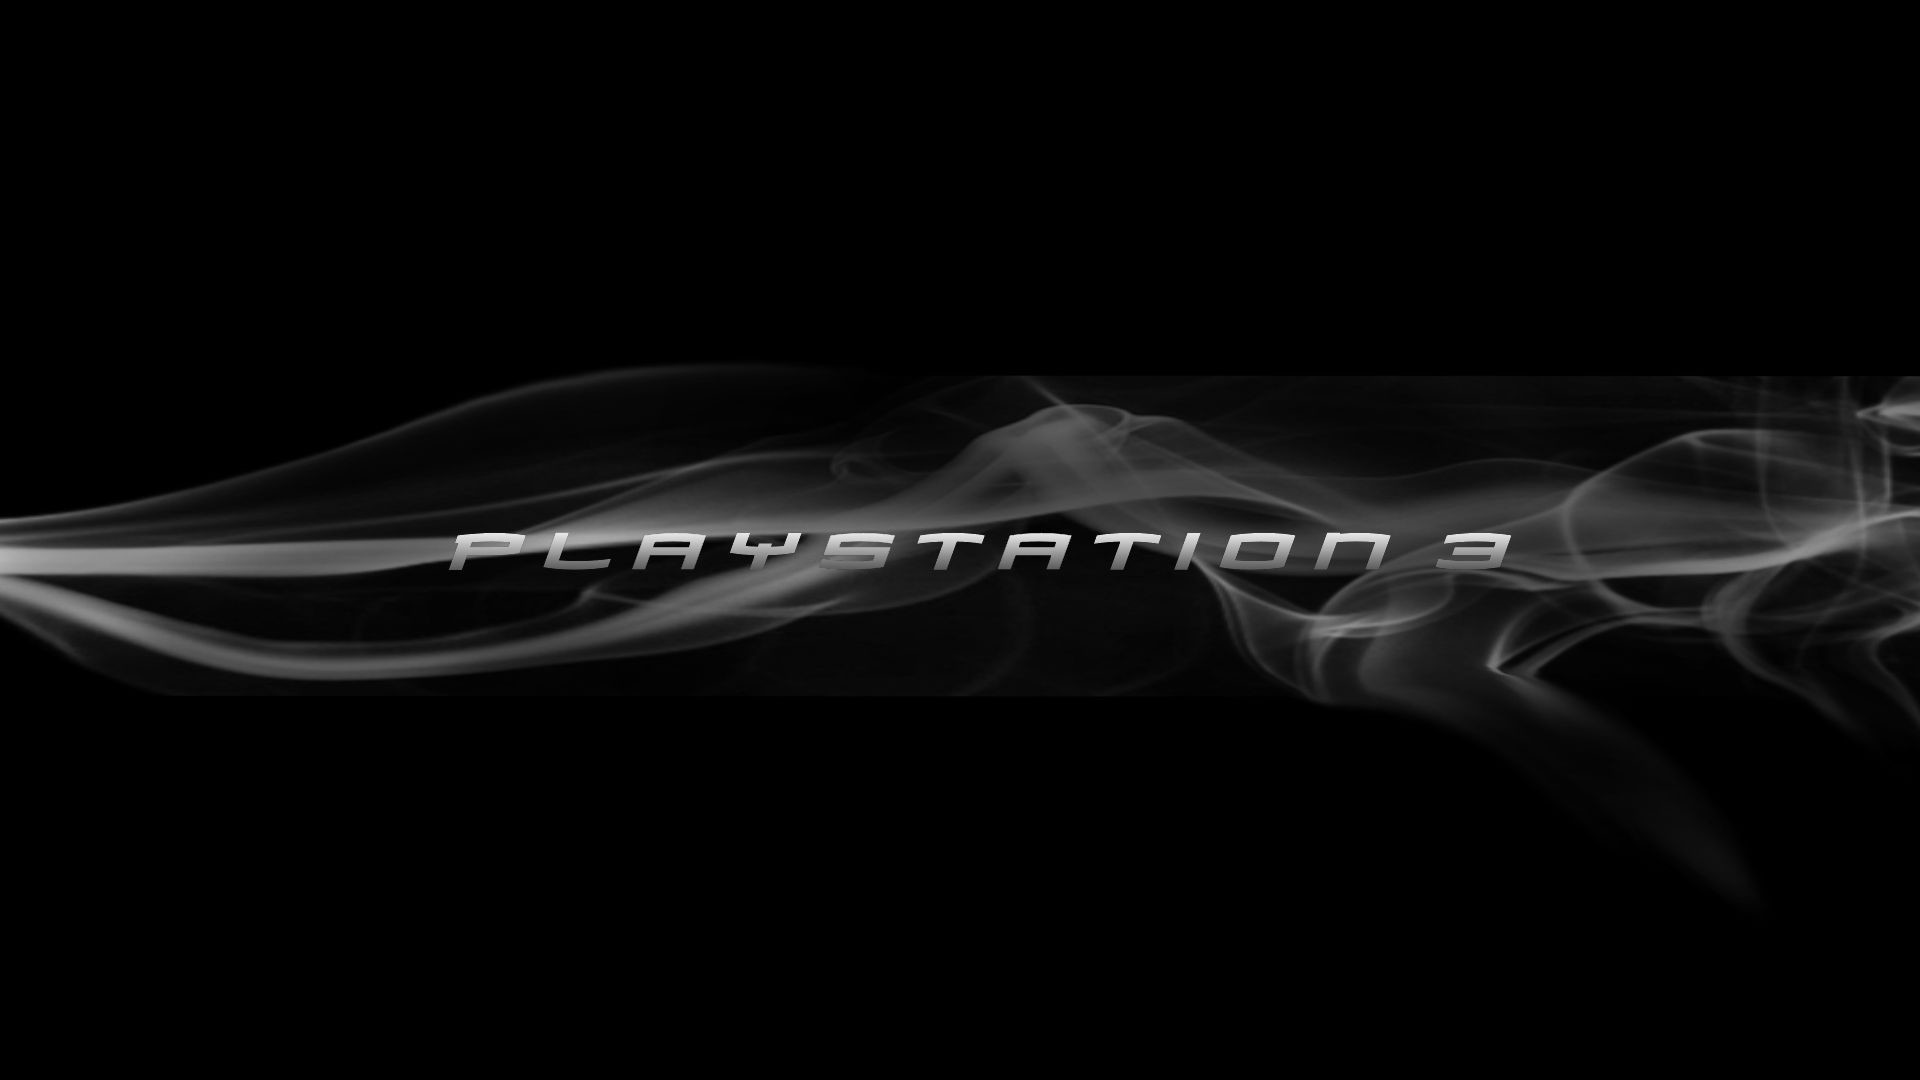 1920x1080 PlayStation 3 Wallpapers 1080p - Wallpaper Cave